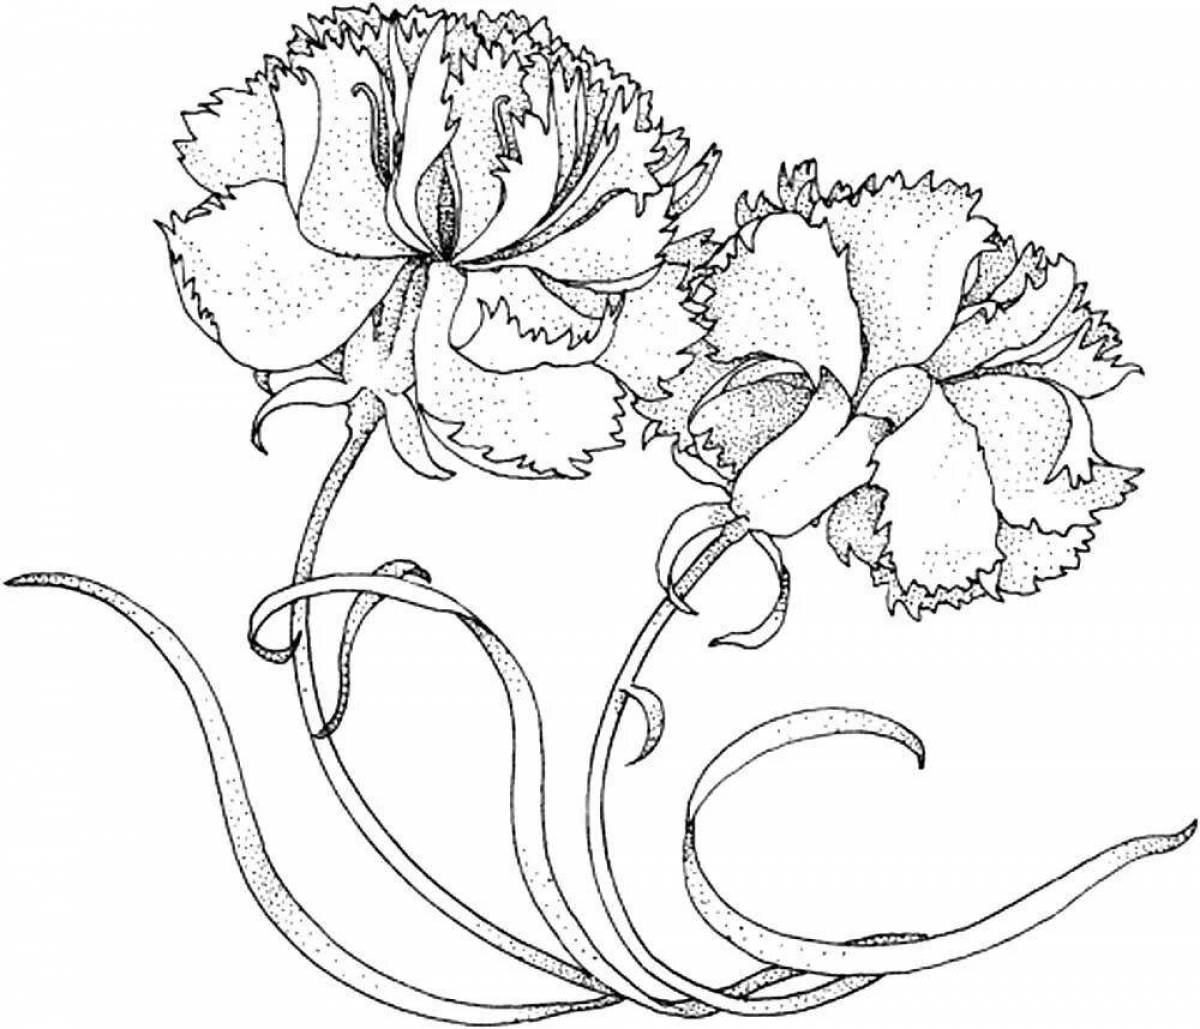 Fine carnations coloring book